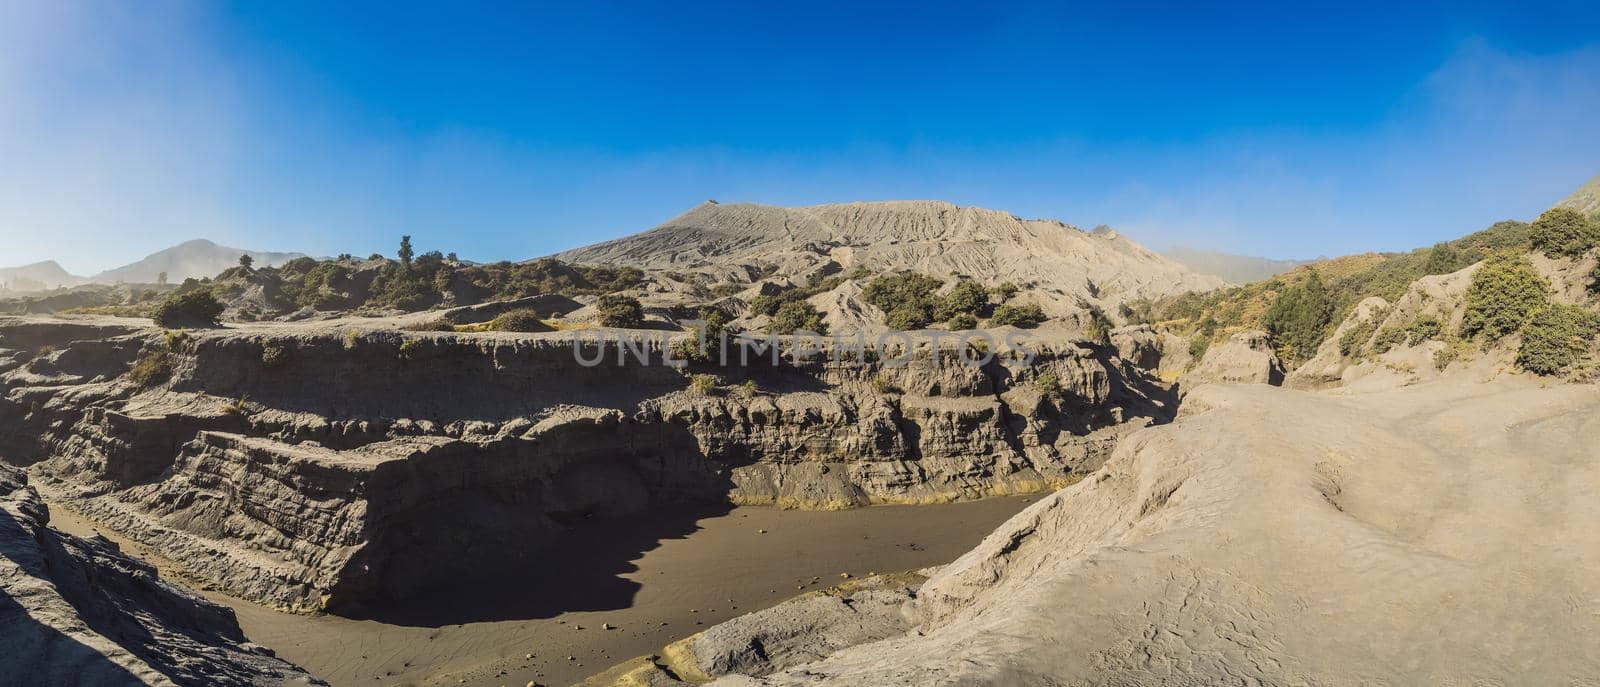 panoramic View on the Bromo volcano or Gunung Bromo on Indonesian in the Bromo Tengger Semeru National Park on the Java Island, Indonesia. One of the most famous volcanic objects in the world. Travel to Indonesia concept by galitskaya